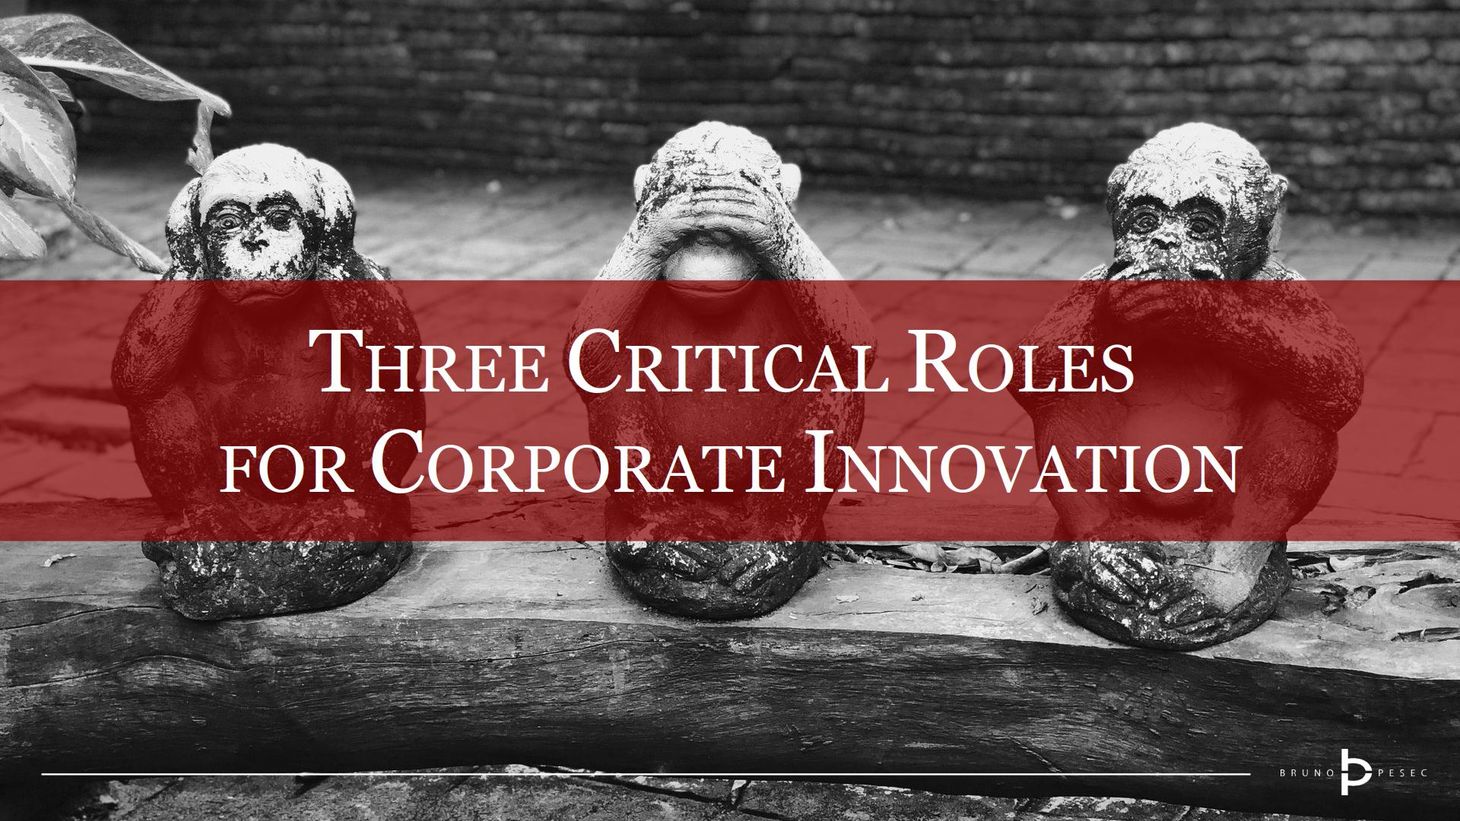 Three critical roles for corporate innovation